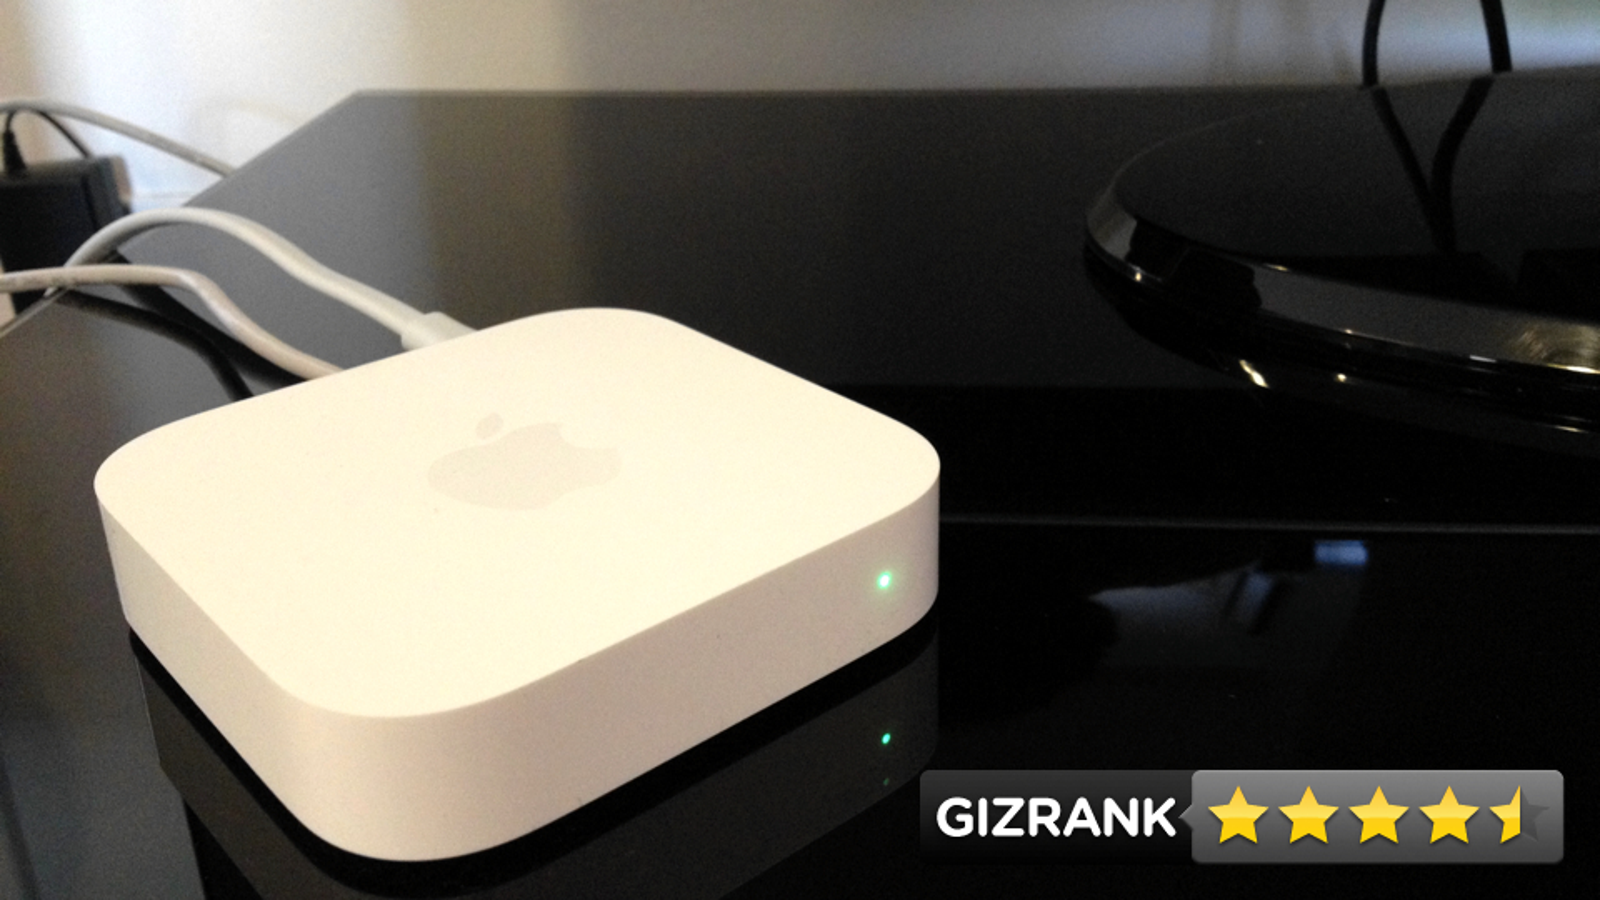 apple router airport express setup